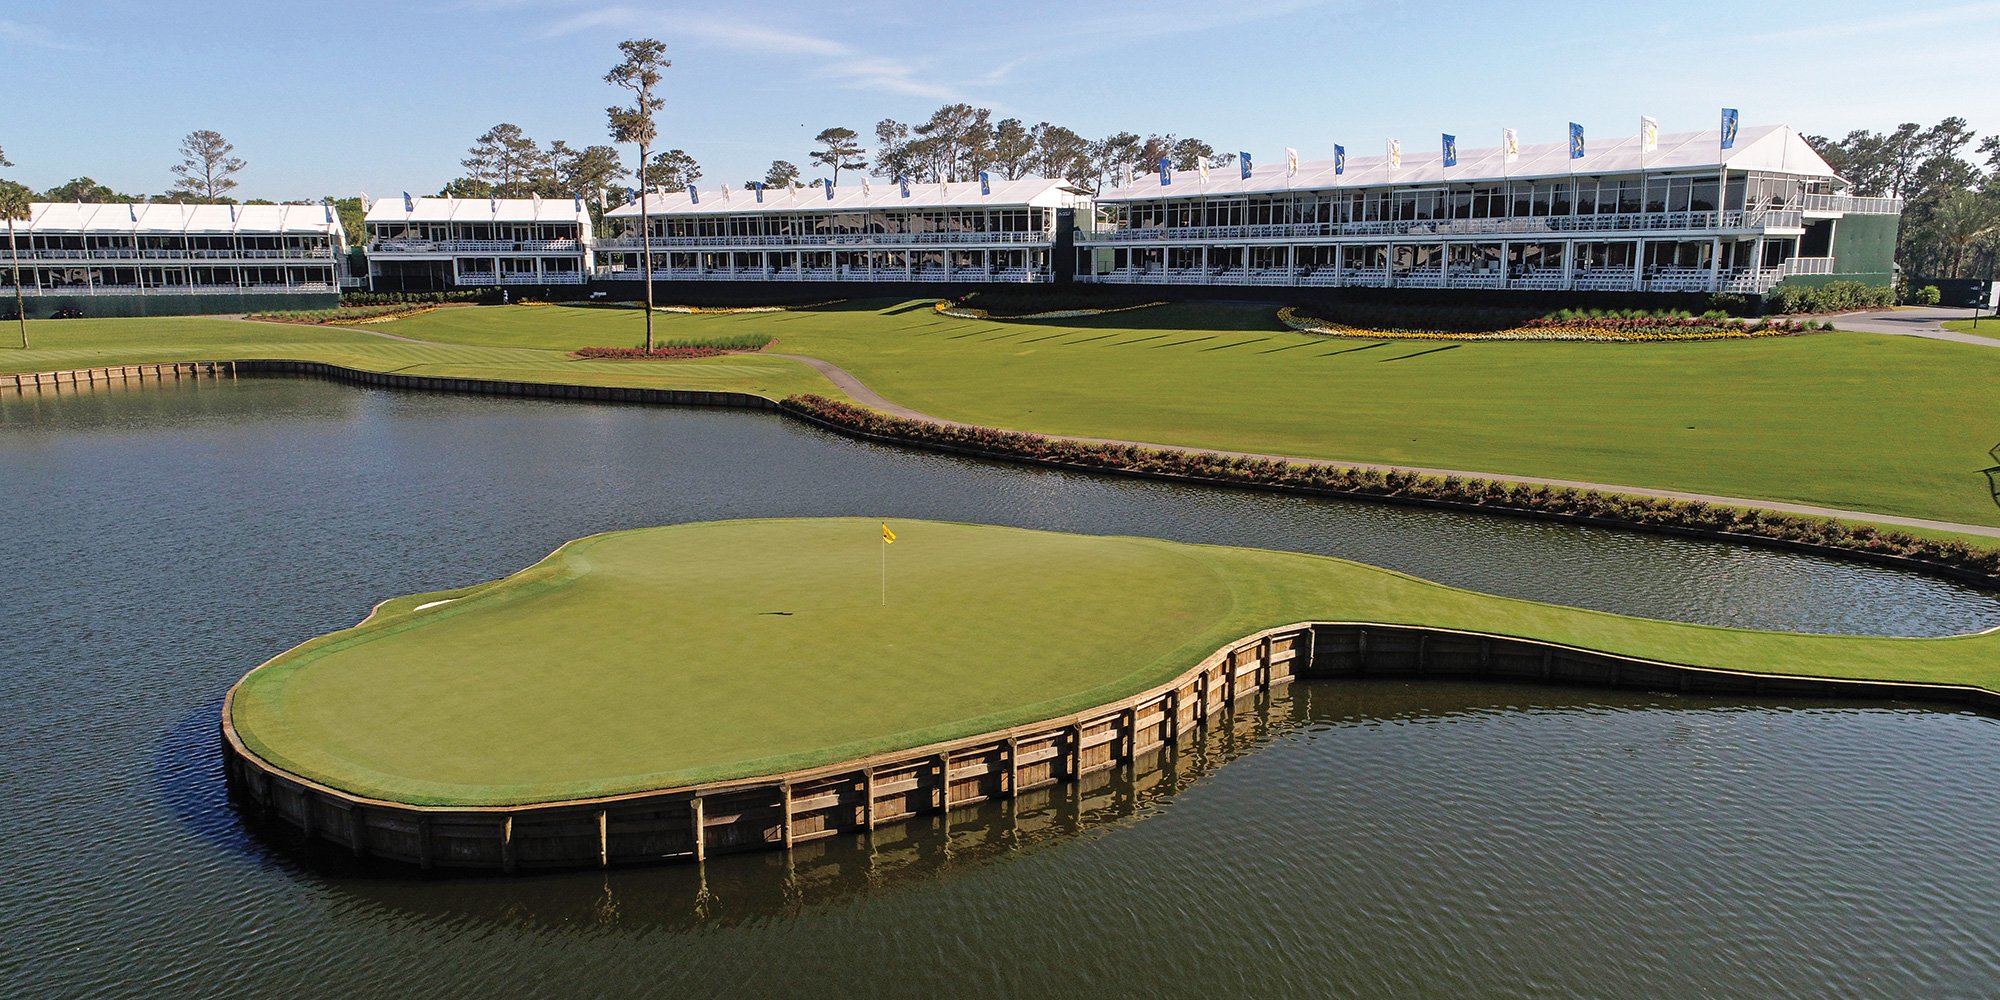 The inspiration came from the famous 17th hole on the Stadium course at TPC Sawgrass in Florida.